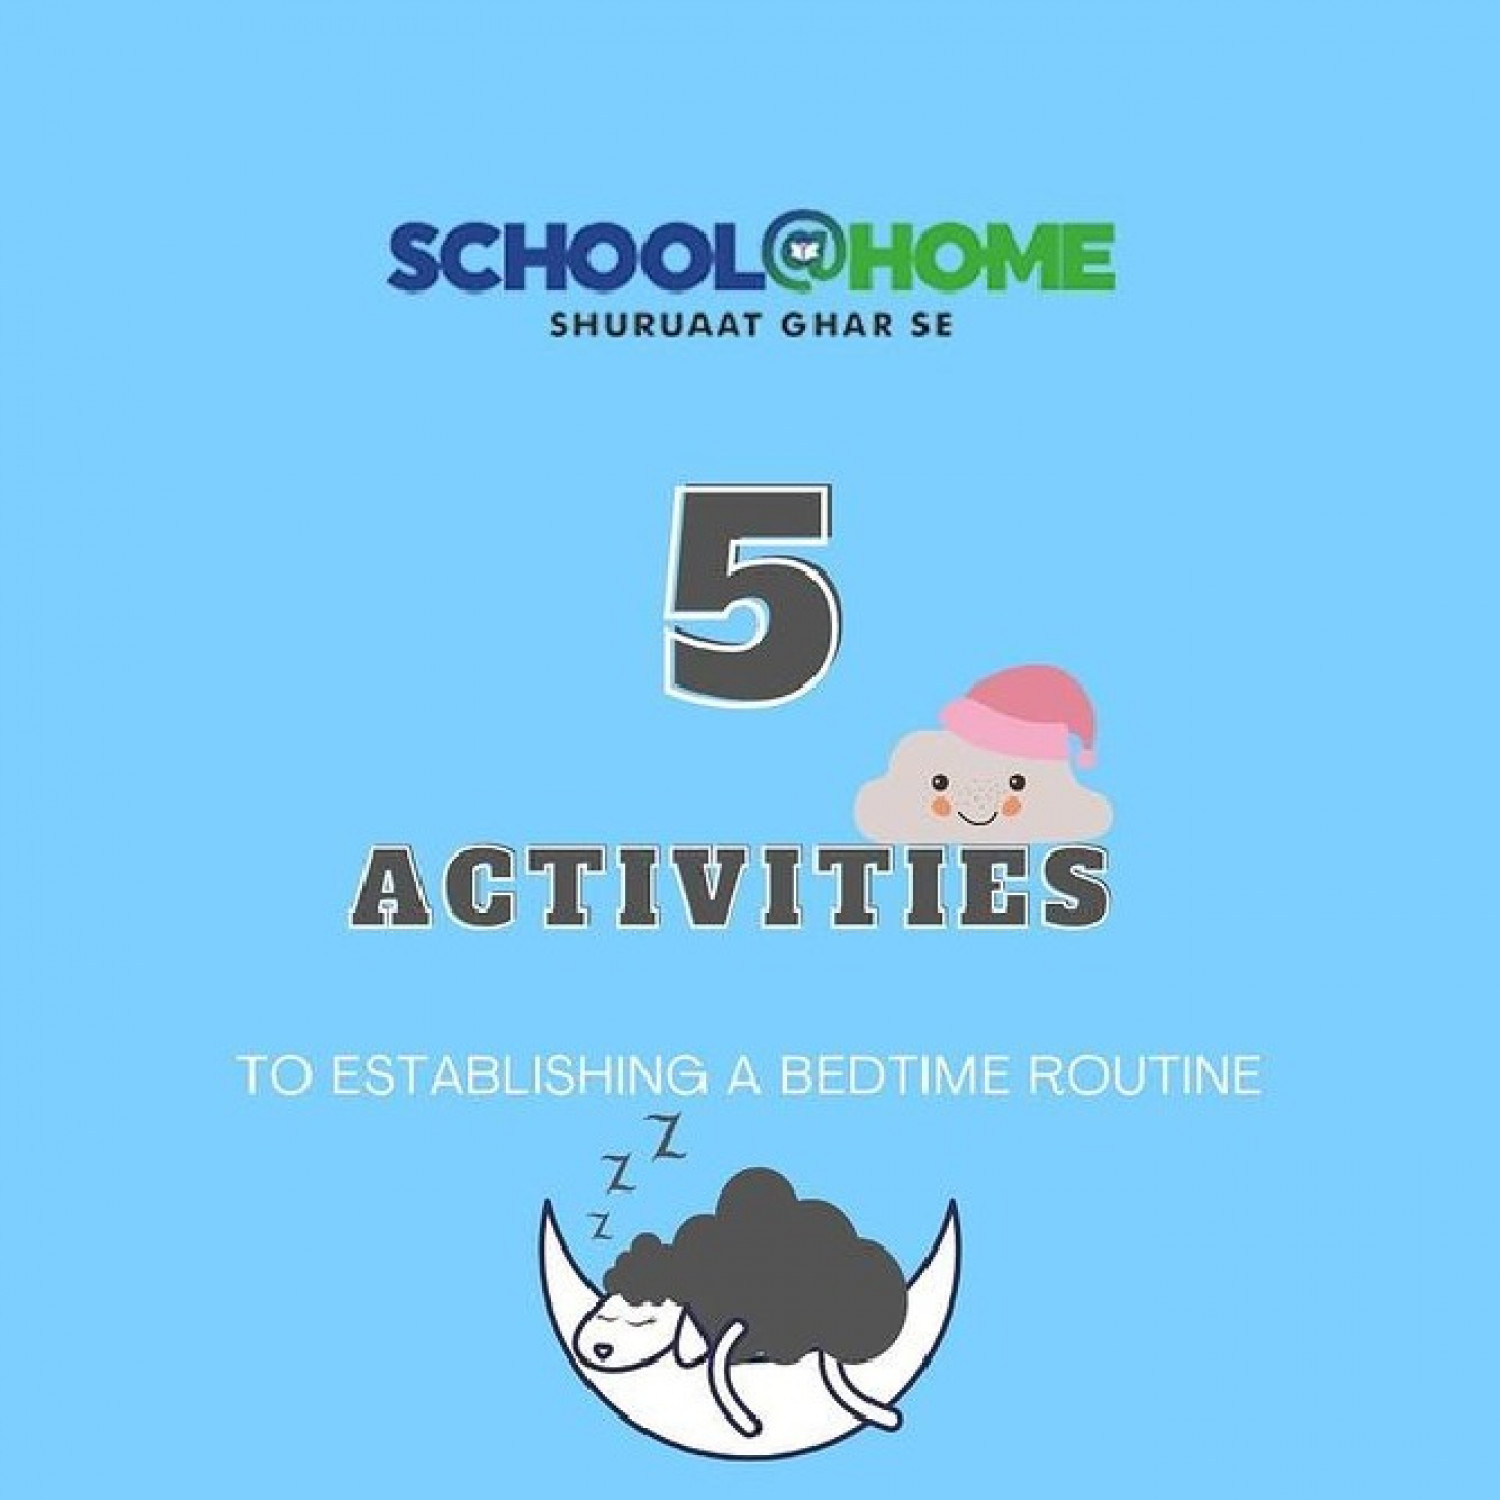 5 Activitie to Establishing a Bedtime Routine Infographic